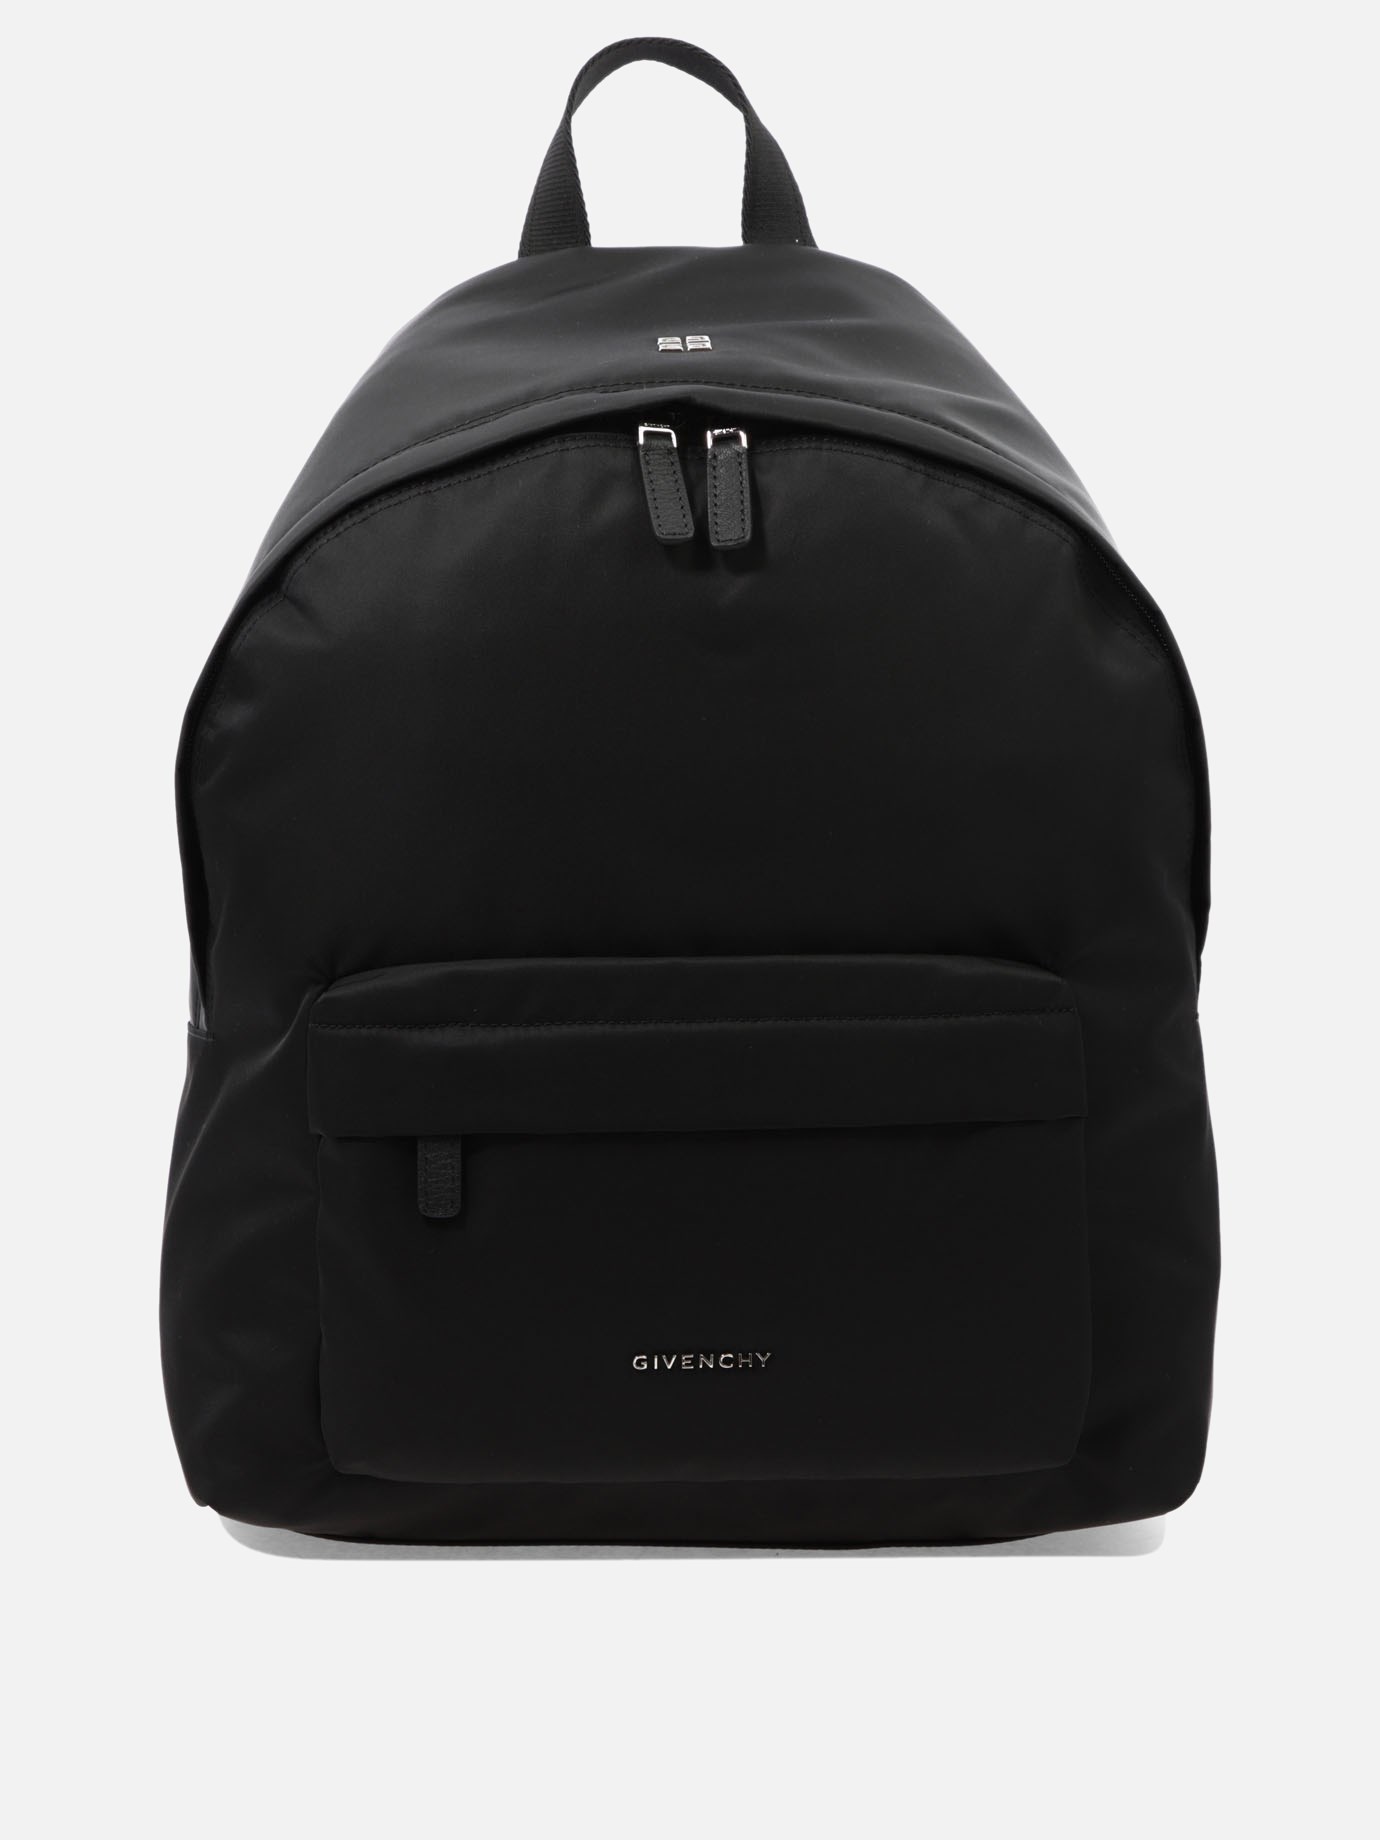  Essential  backpackby Givenchy - 0